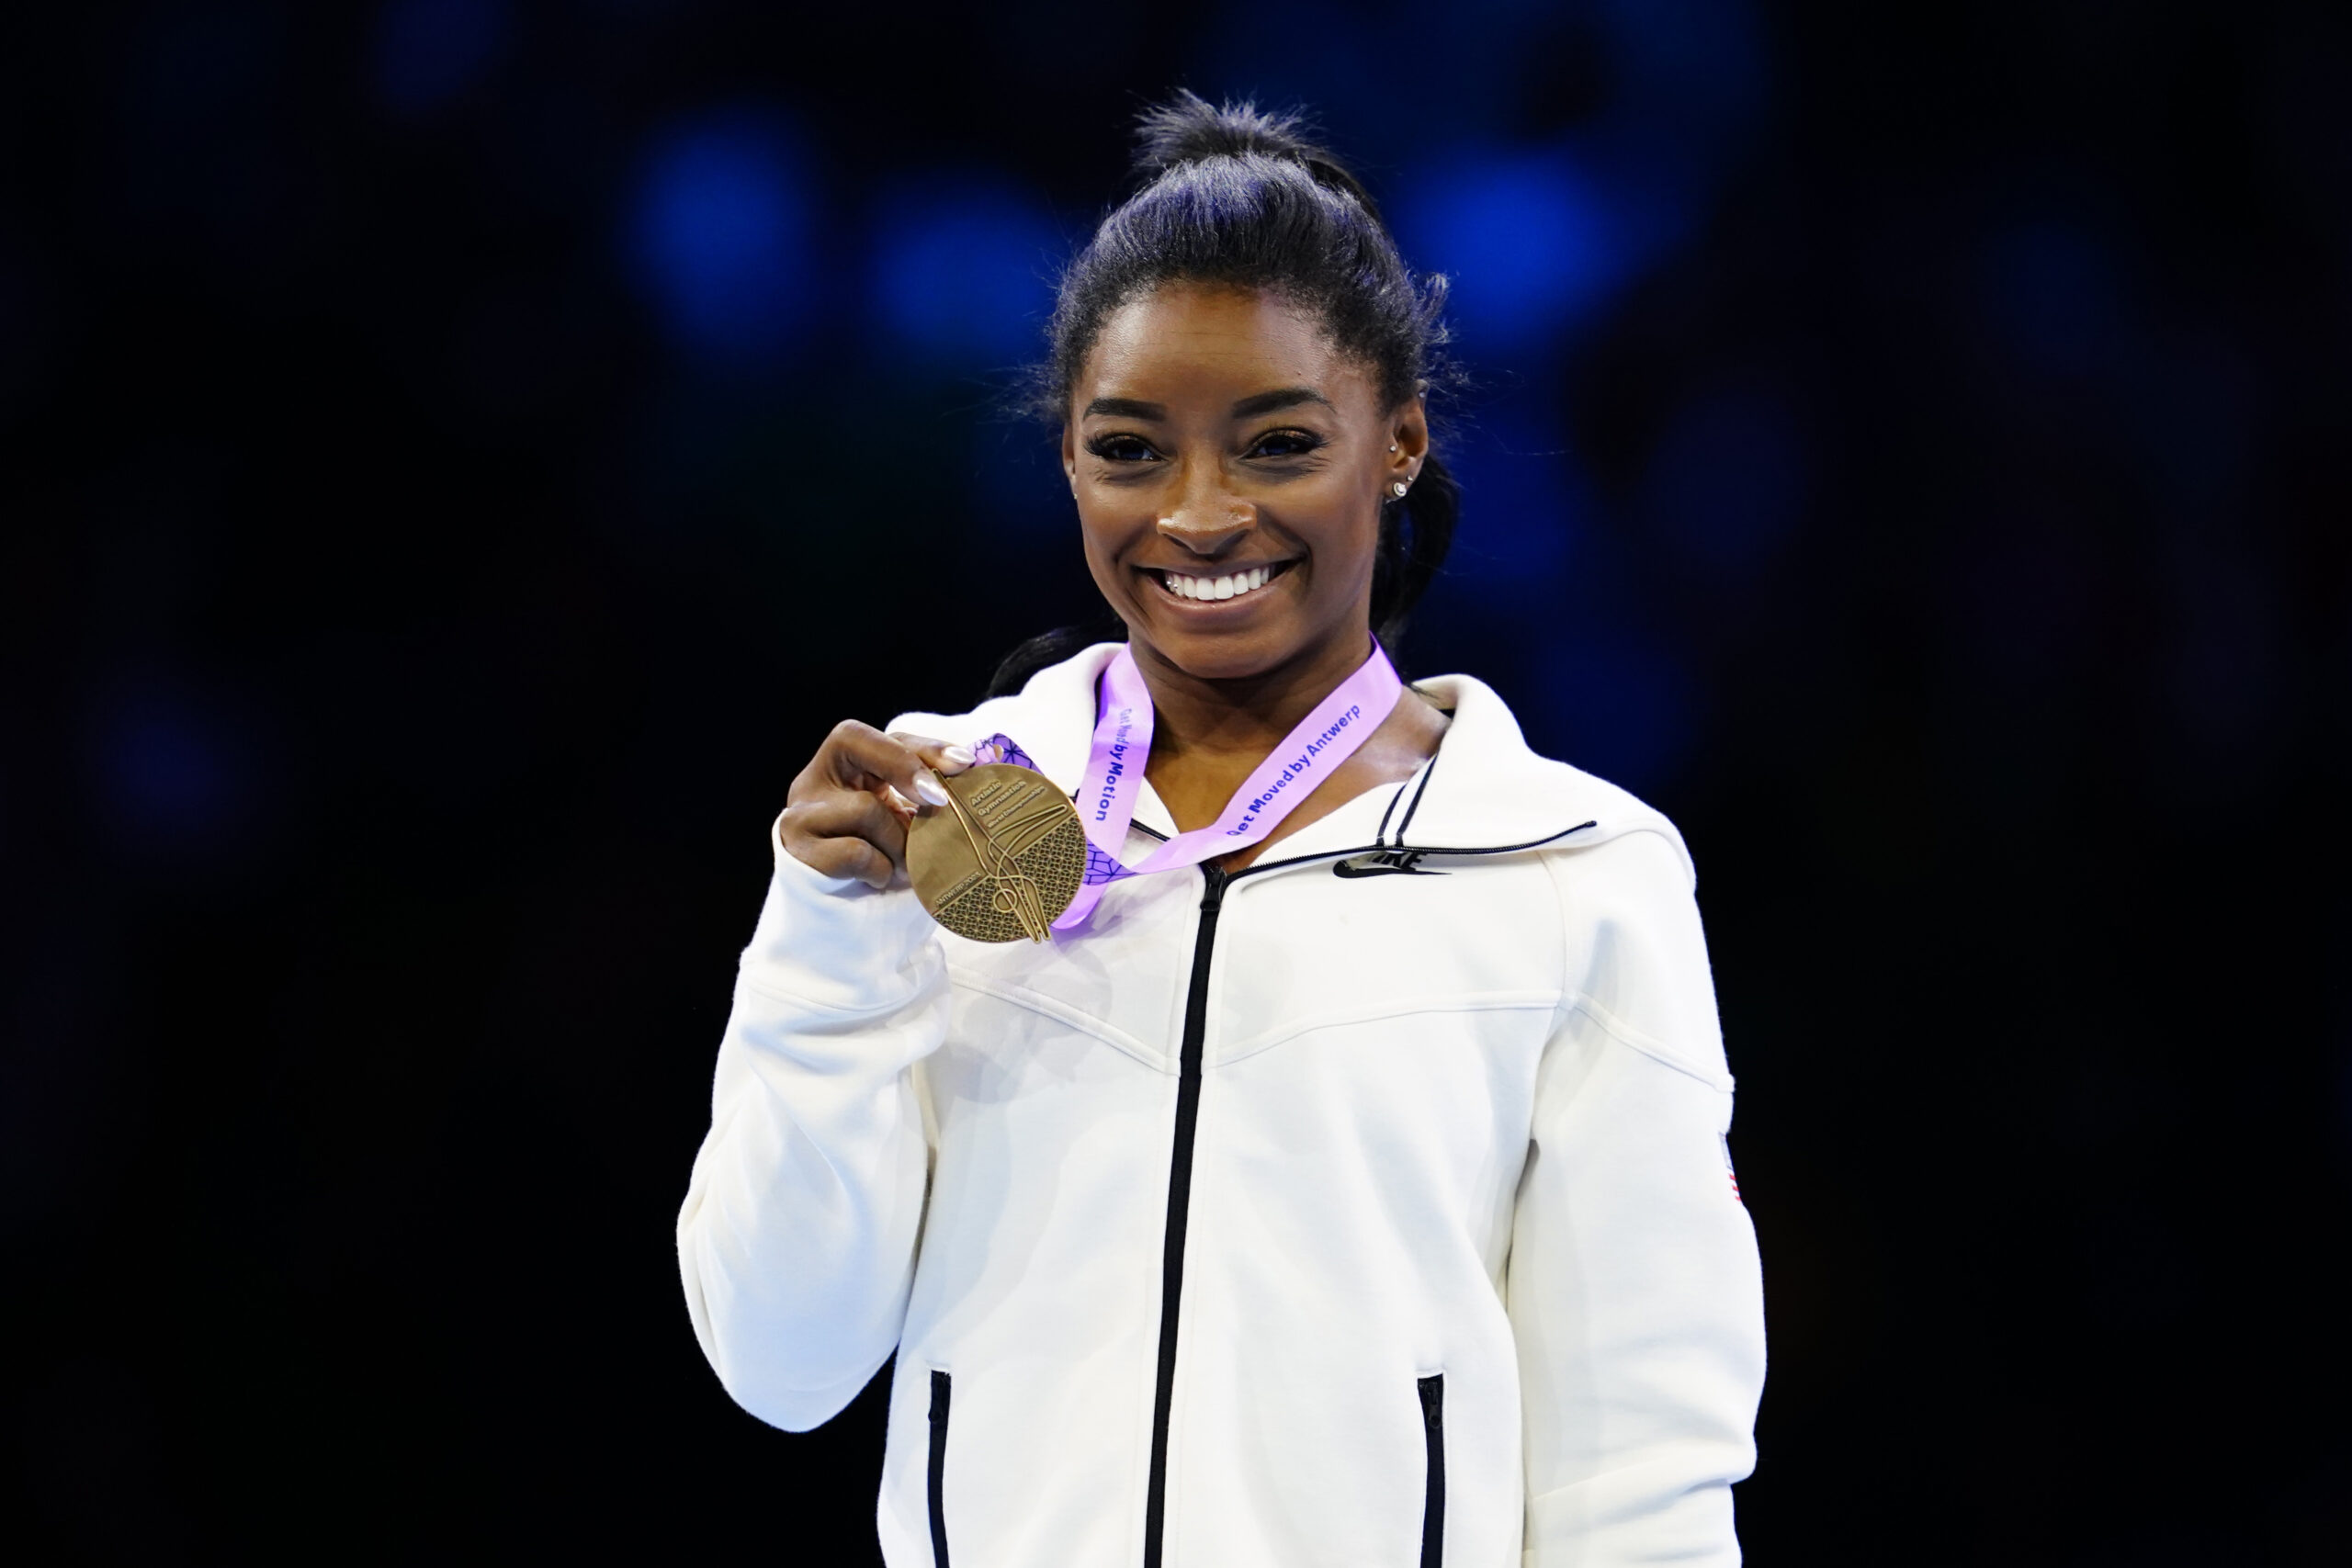 Where does Simone Biles live? After getting married to her husband, they started the process of building a new home in Houston, Texas. Pictured: Simone Biles